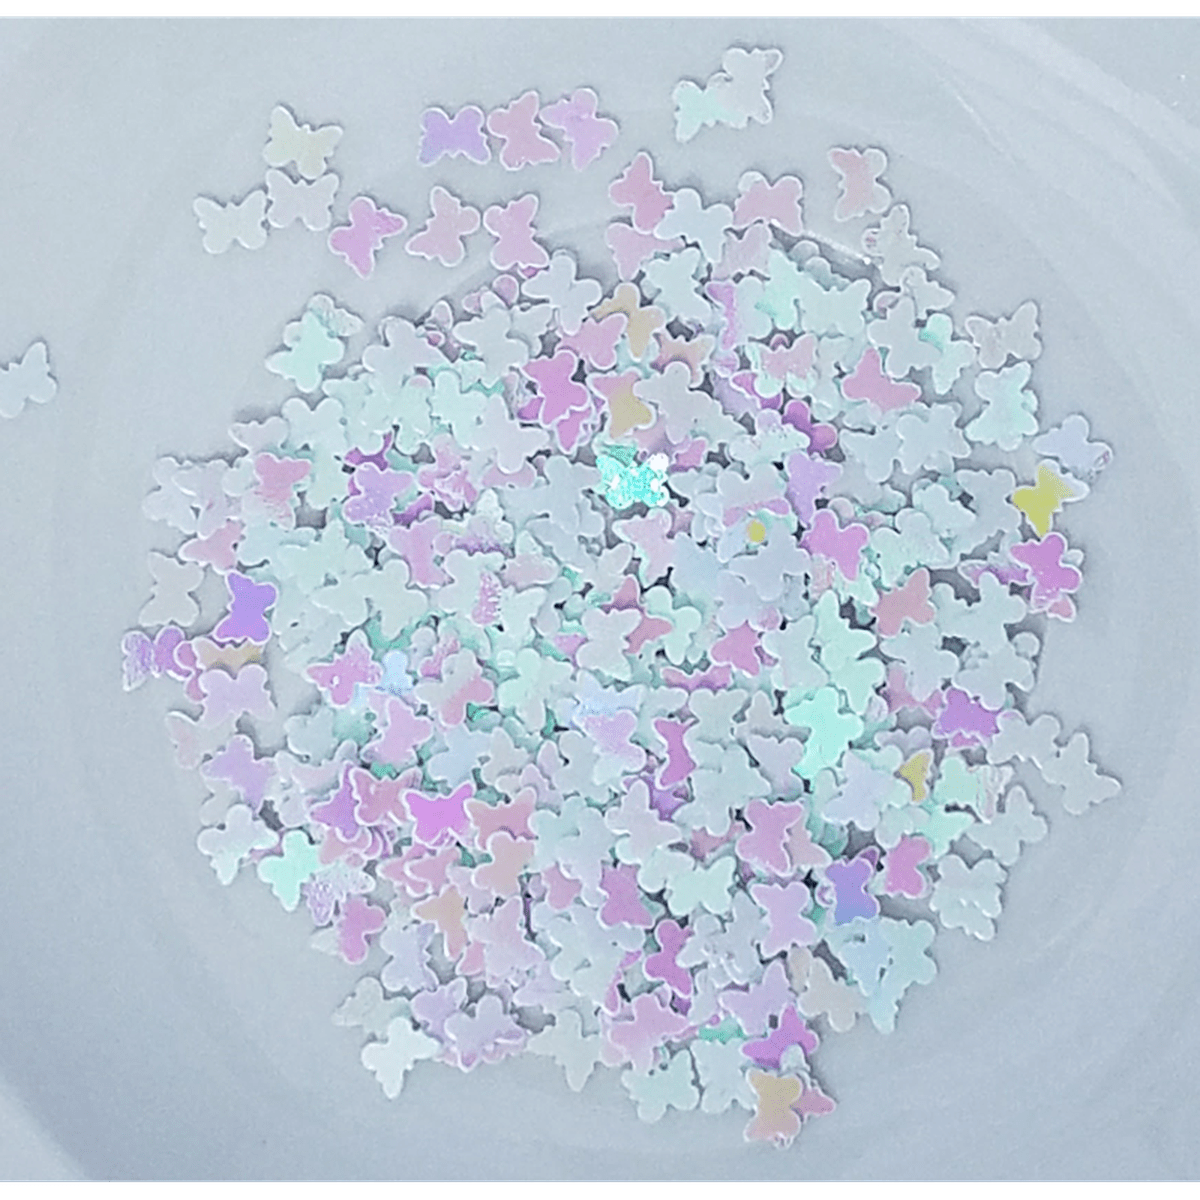 AB White Butterfly Confetti - Kat Scrappiness